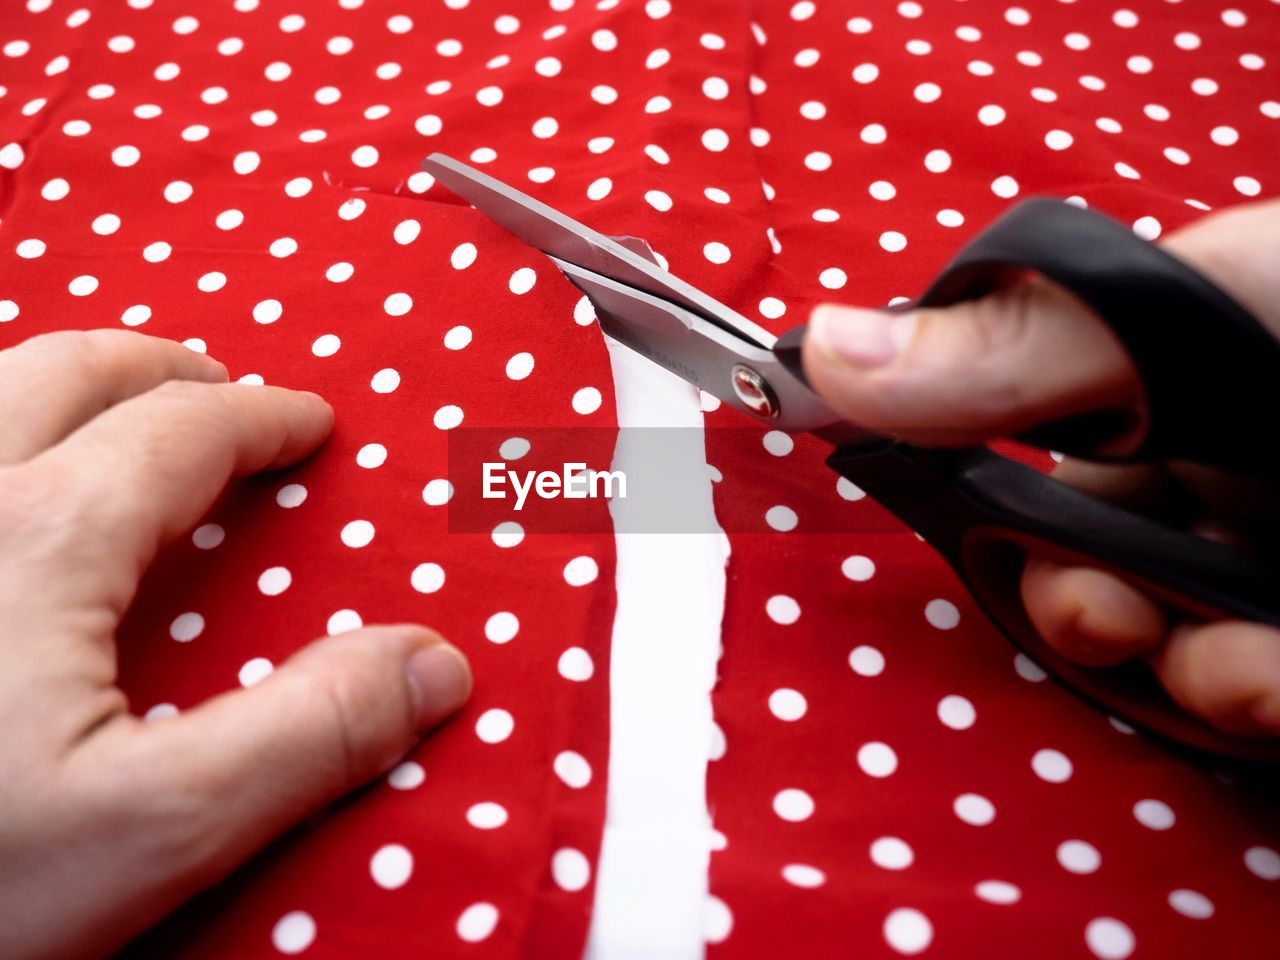 Cropped hands cutting red fabric at table